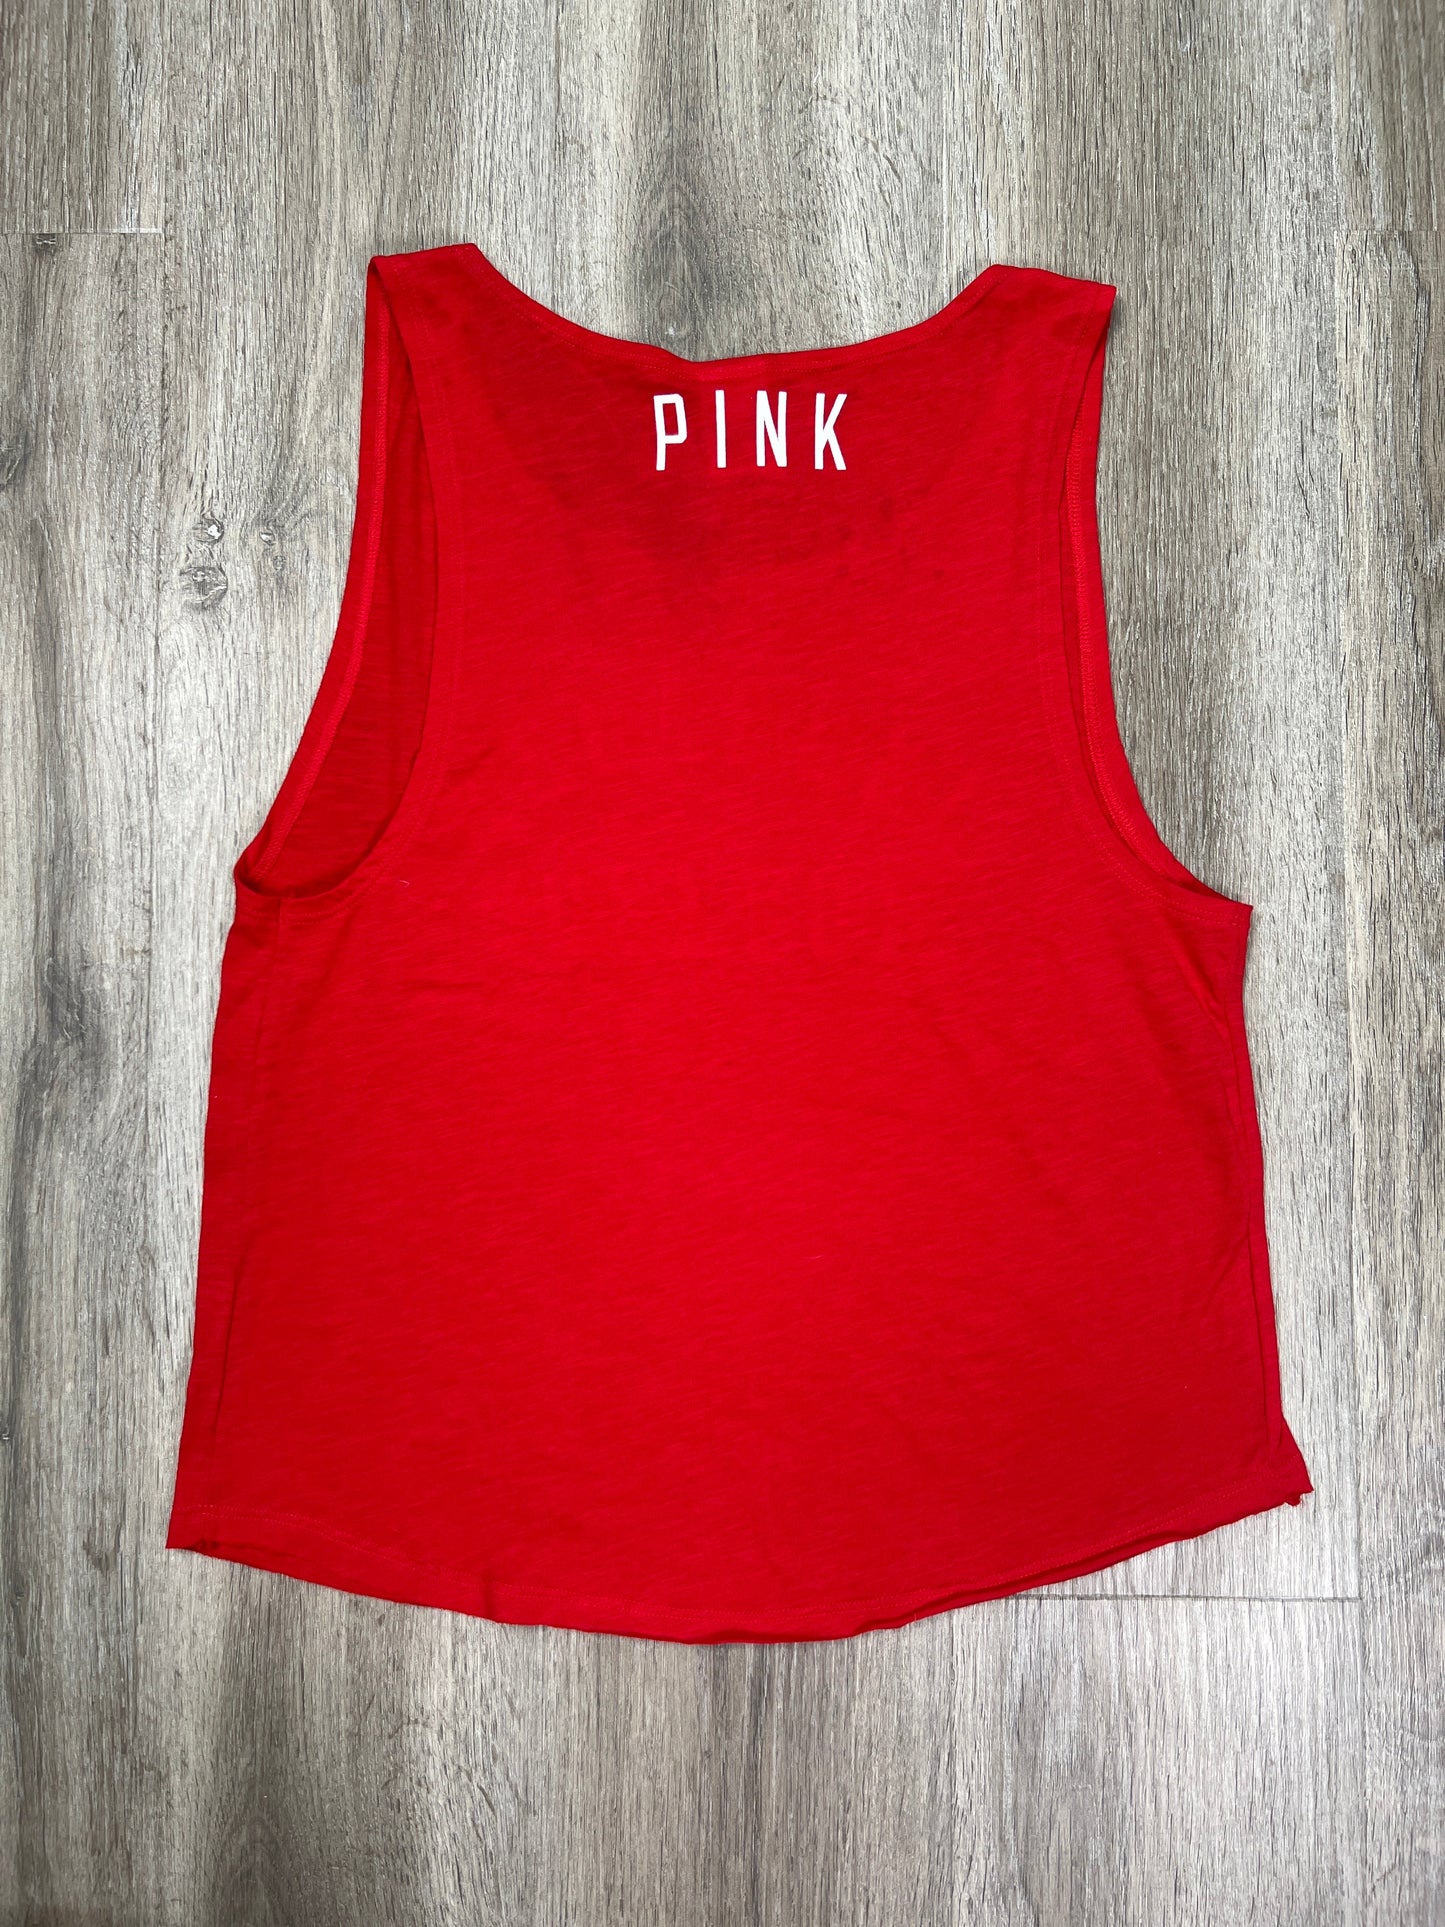 Tank Top By Pink  Size: S